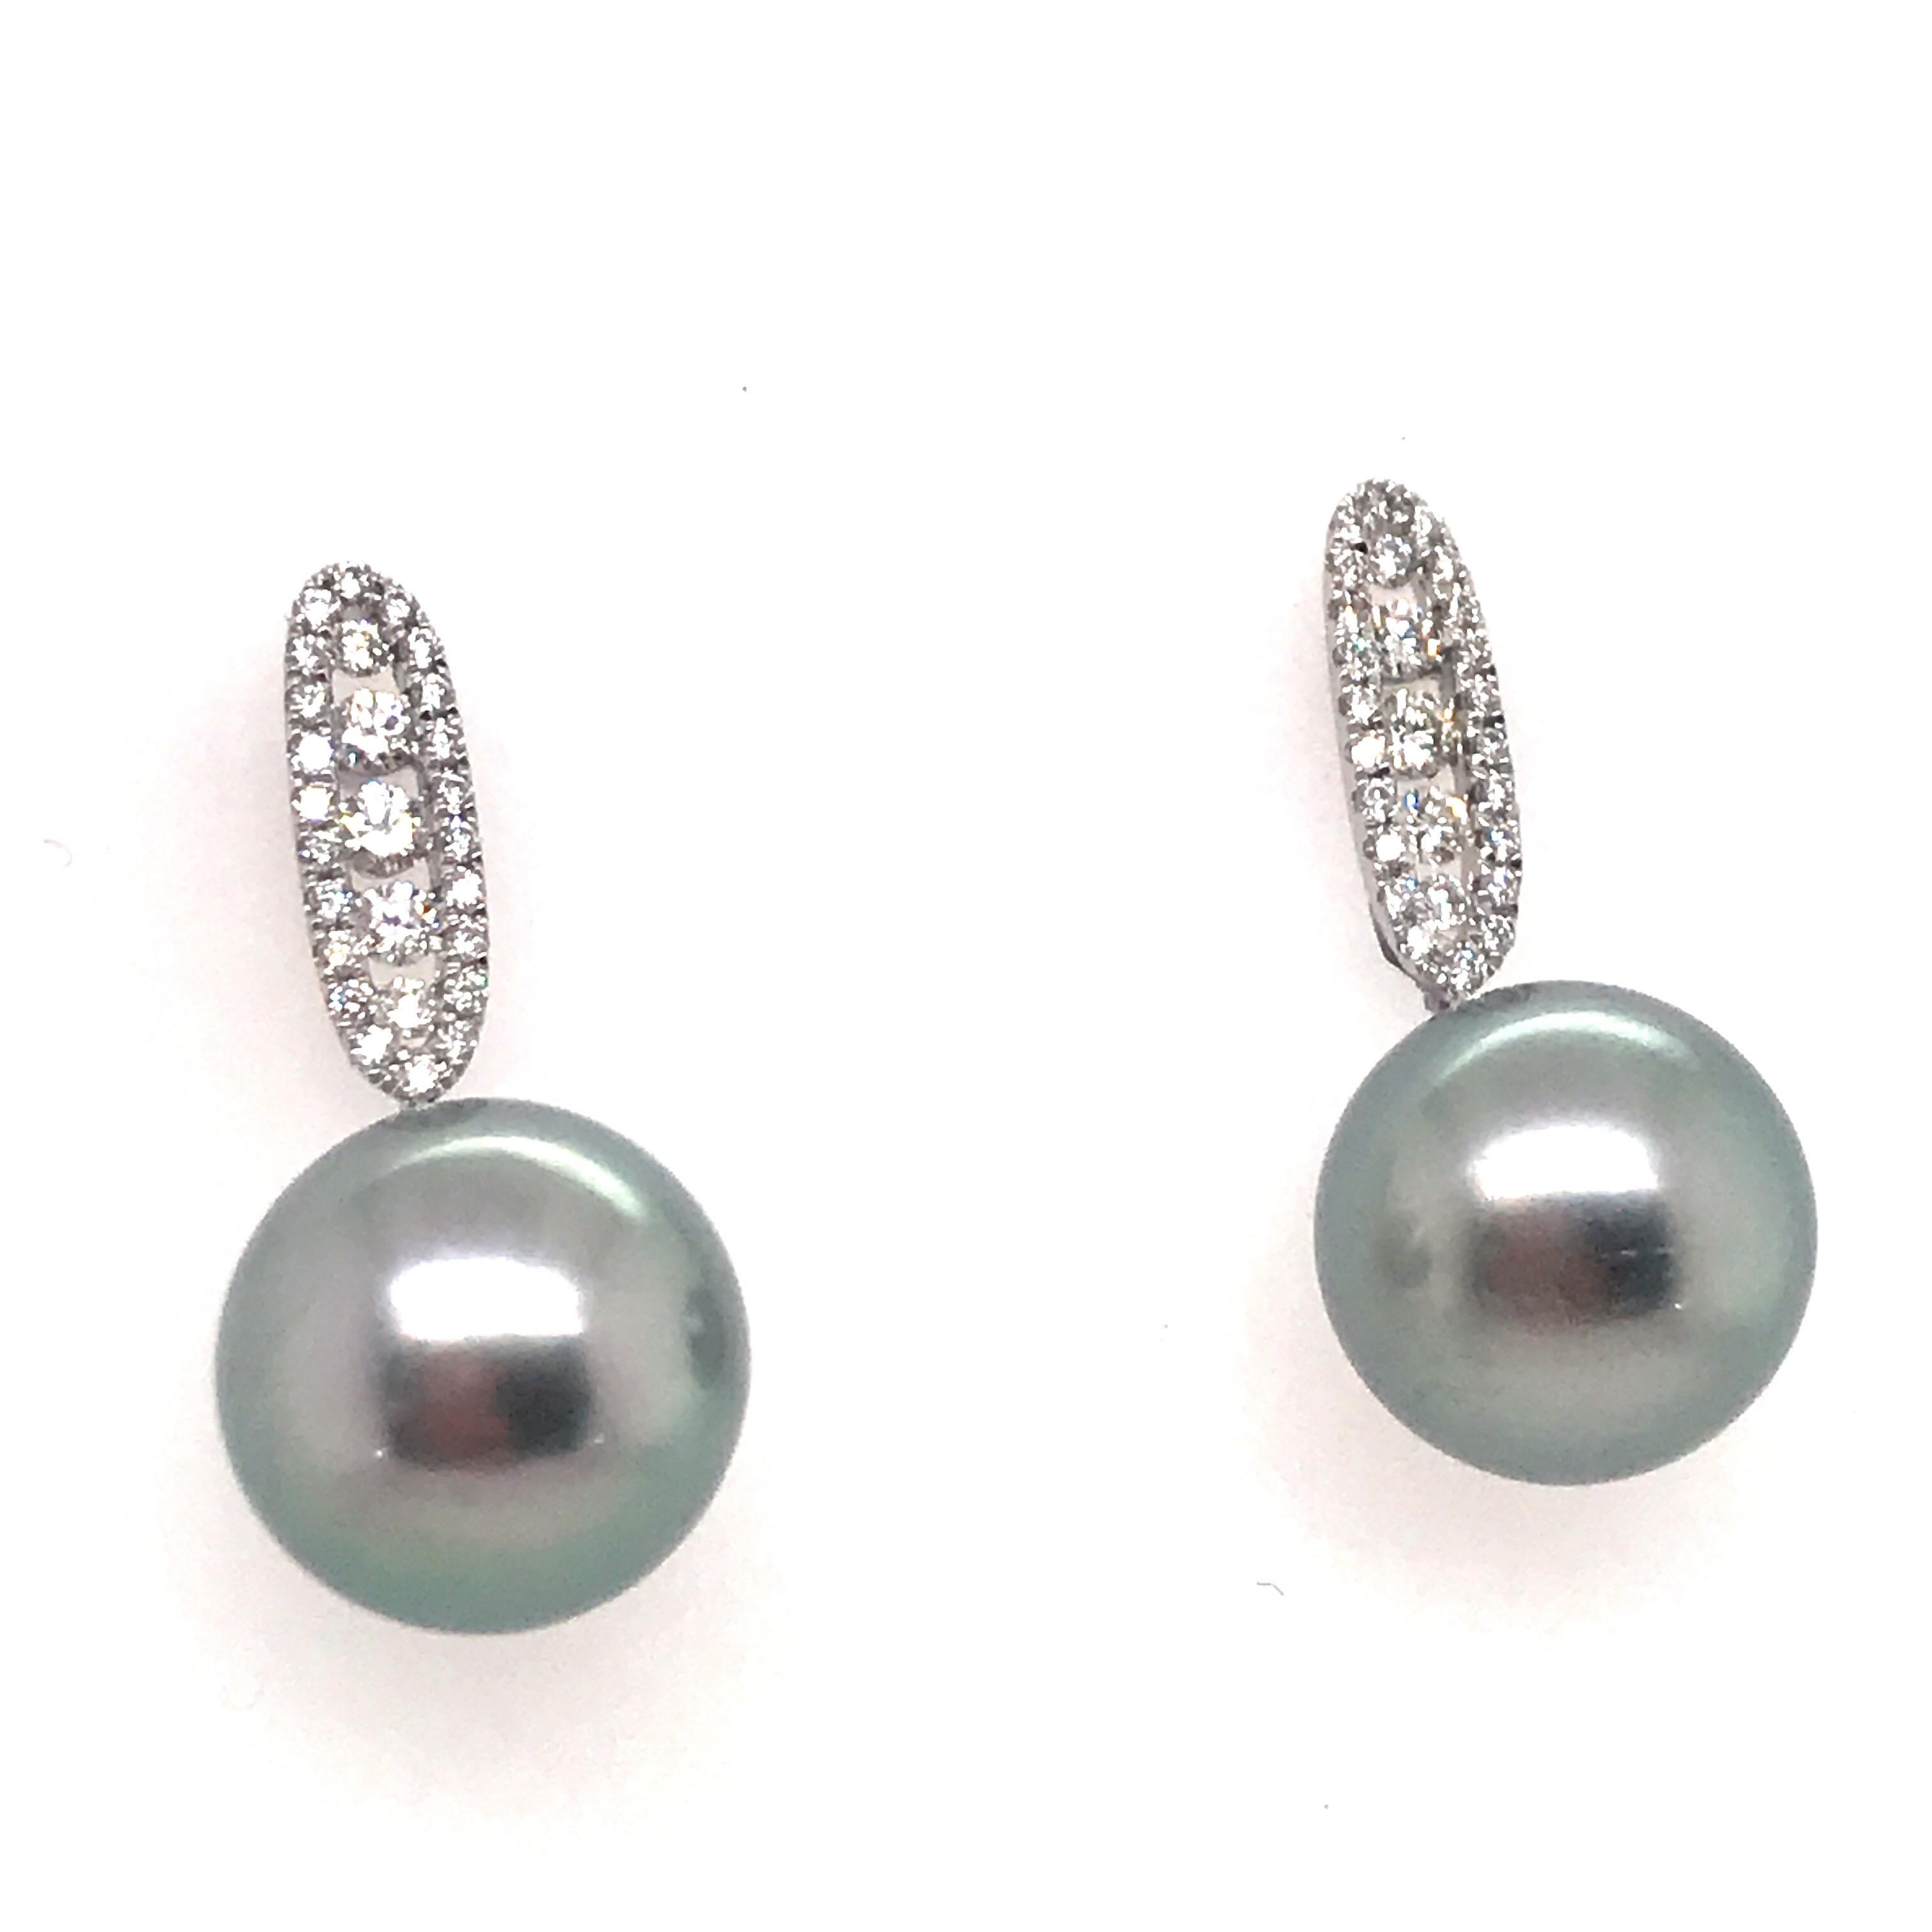 18K White gold drop earrings featuring two Grey Tahitian pearls measuring 11-12 mm and 54 round diamonds weighing 0.45 carats.